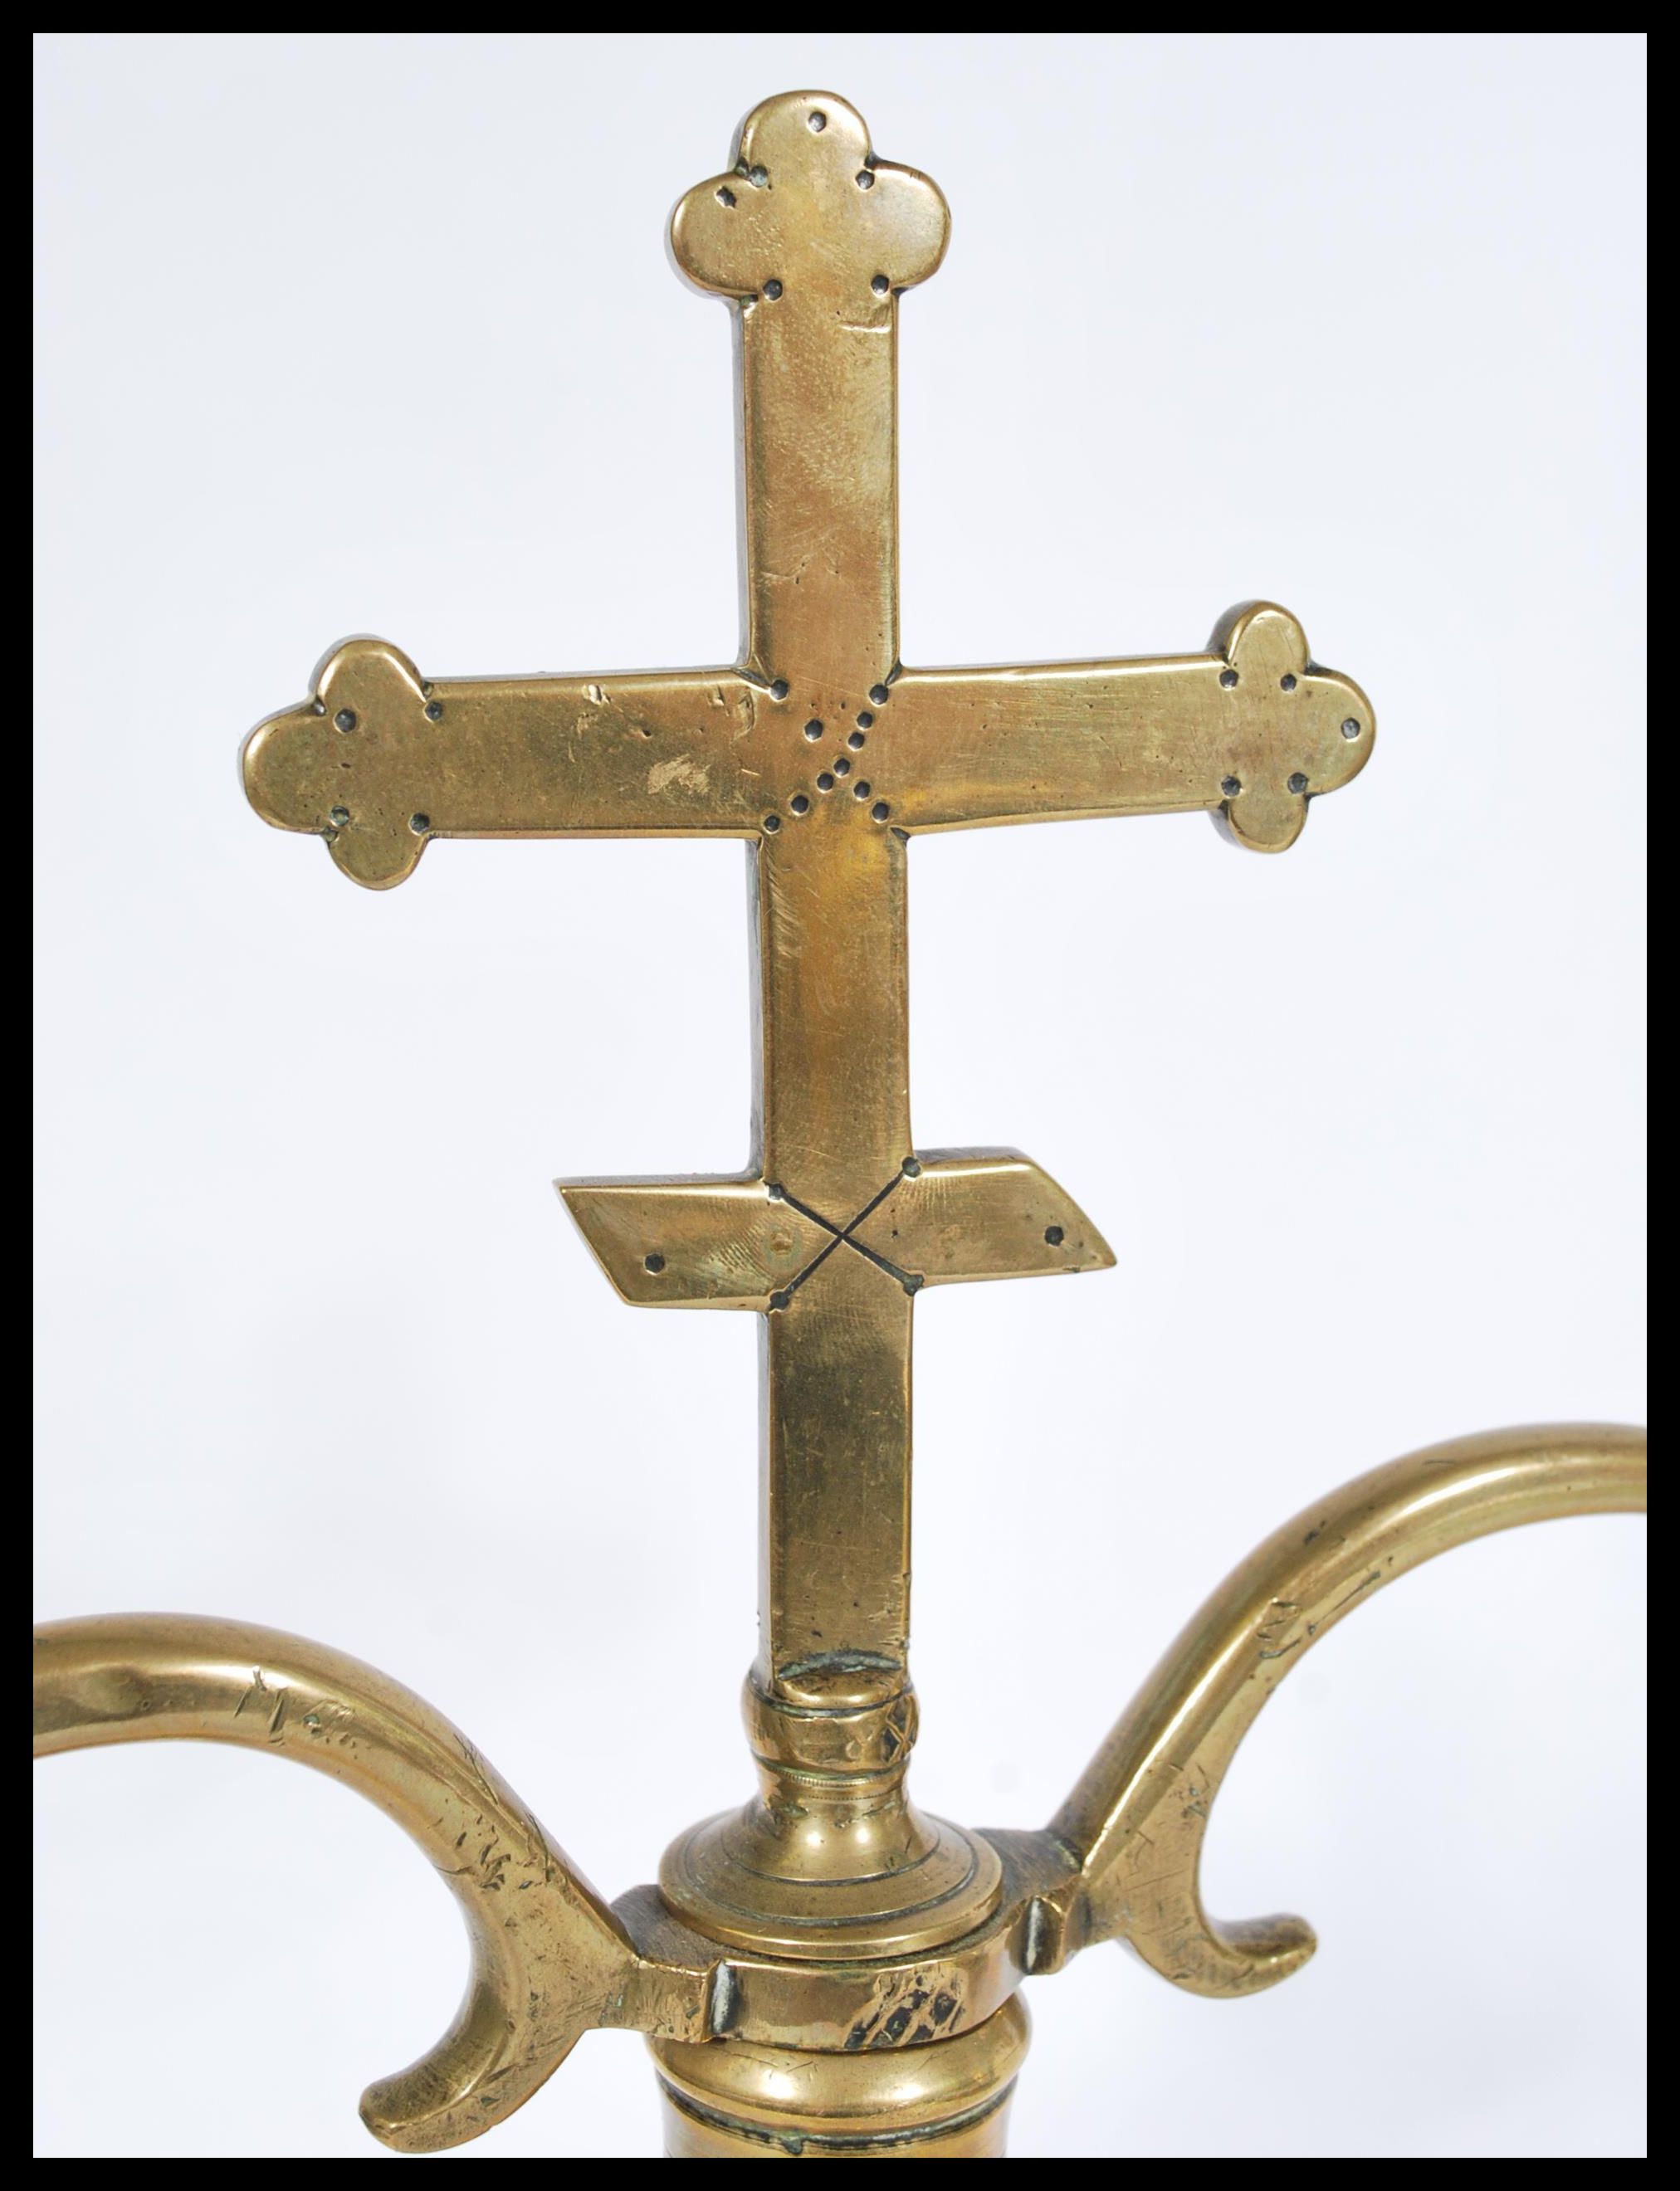 An 18th century ecclesiastical brass candelabra ra - Image 6 of 6